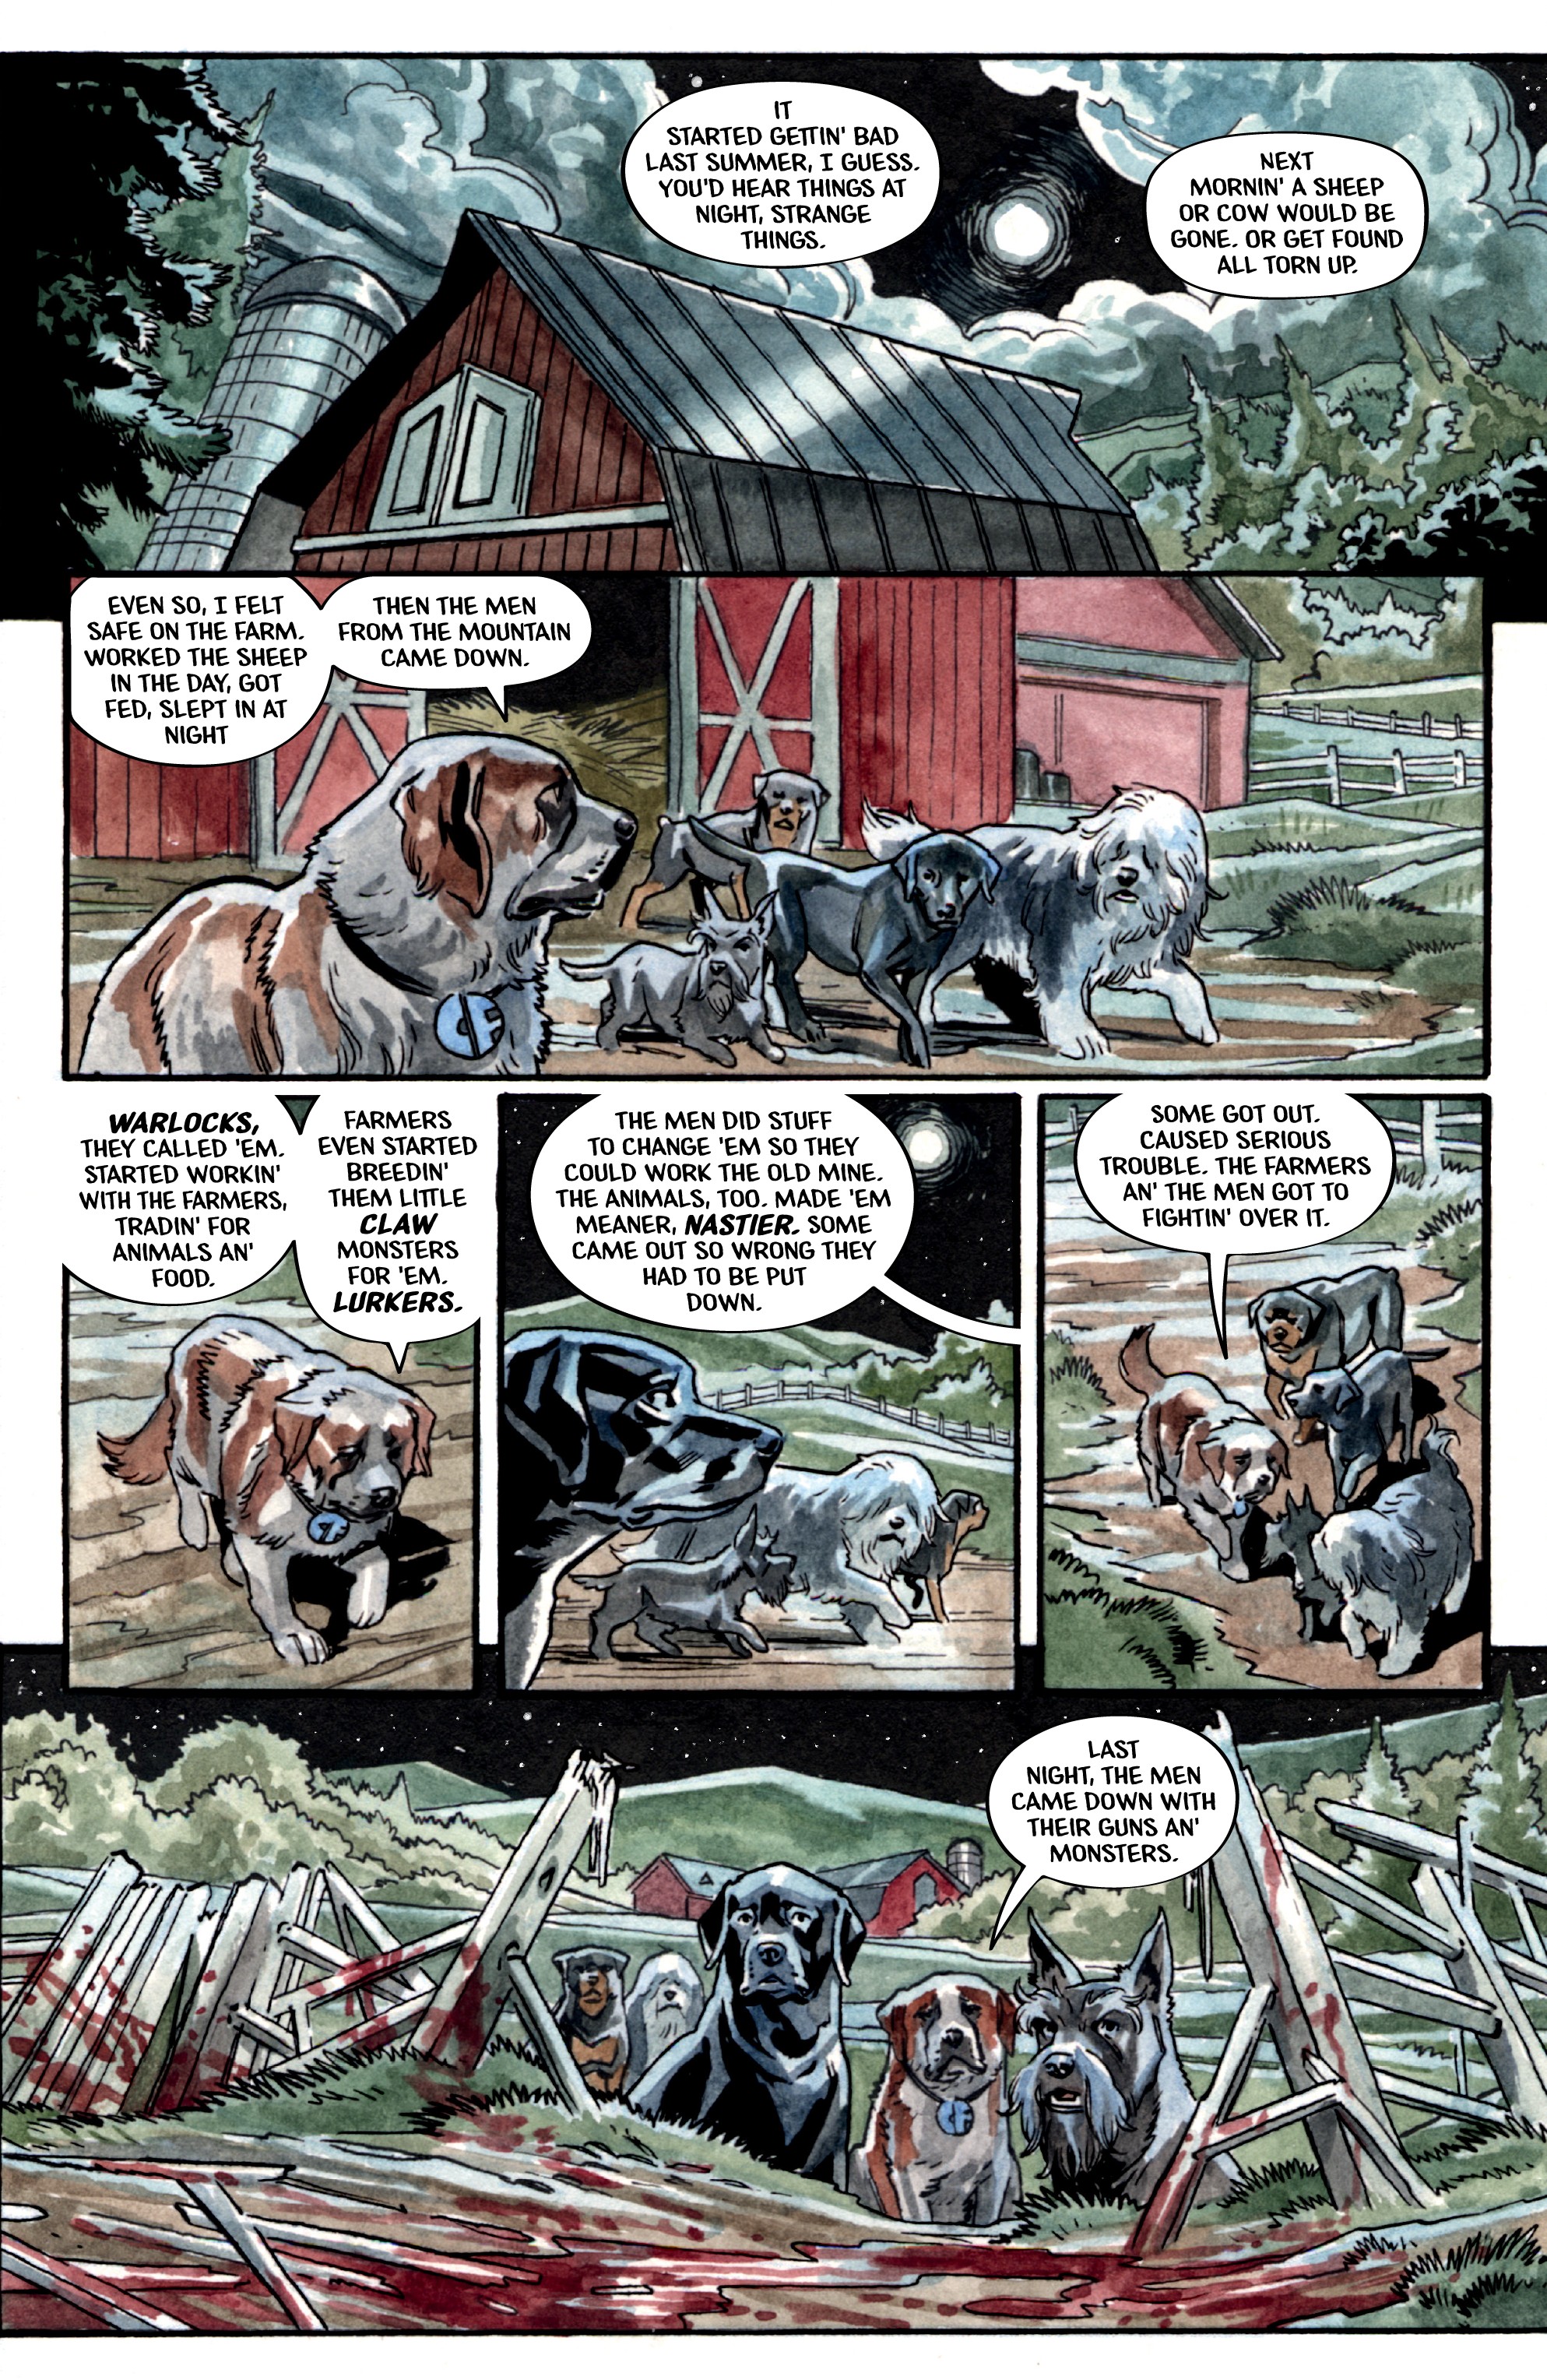 Beasts of Burden: Wise Dogs and Eldritch Men  (2018-): Chapter 3 - Page 3